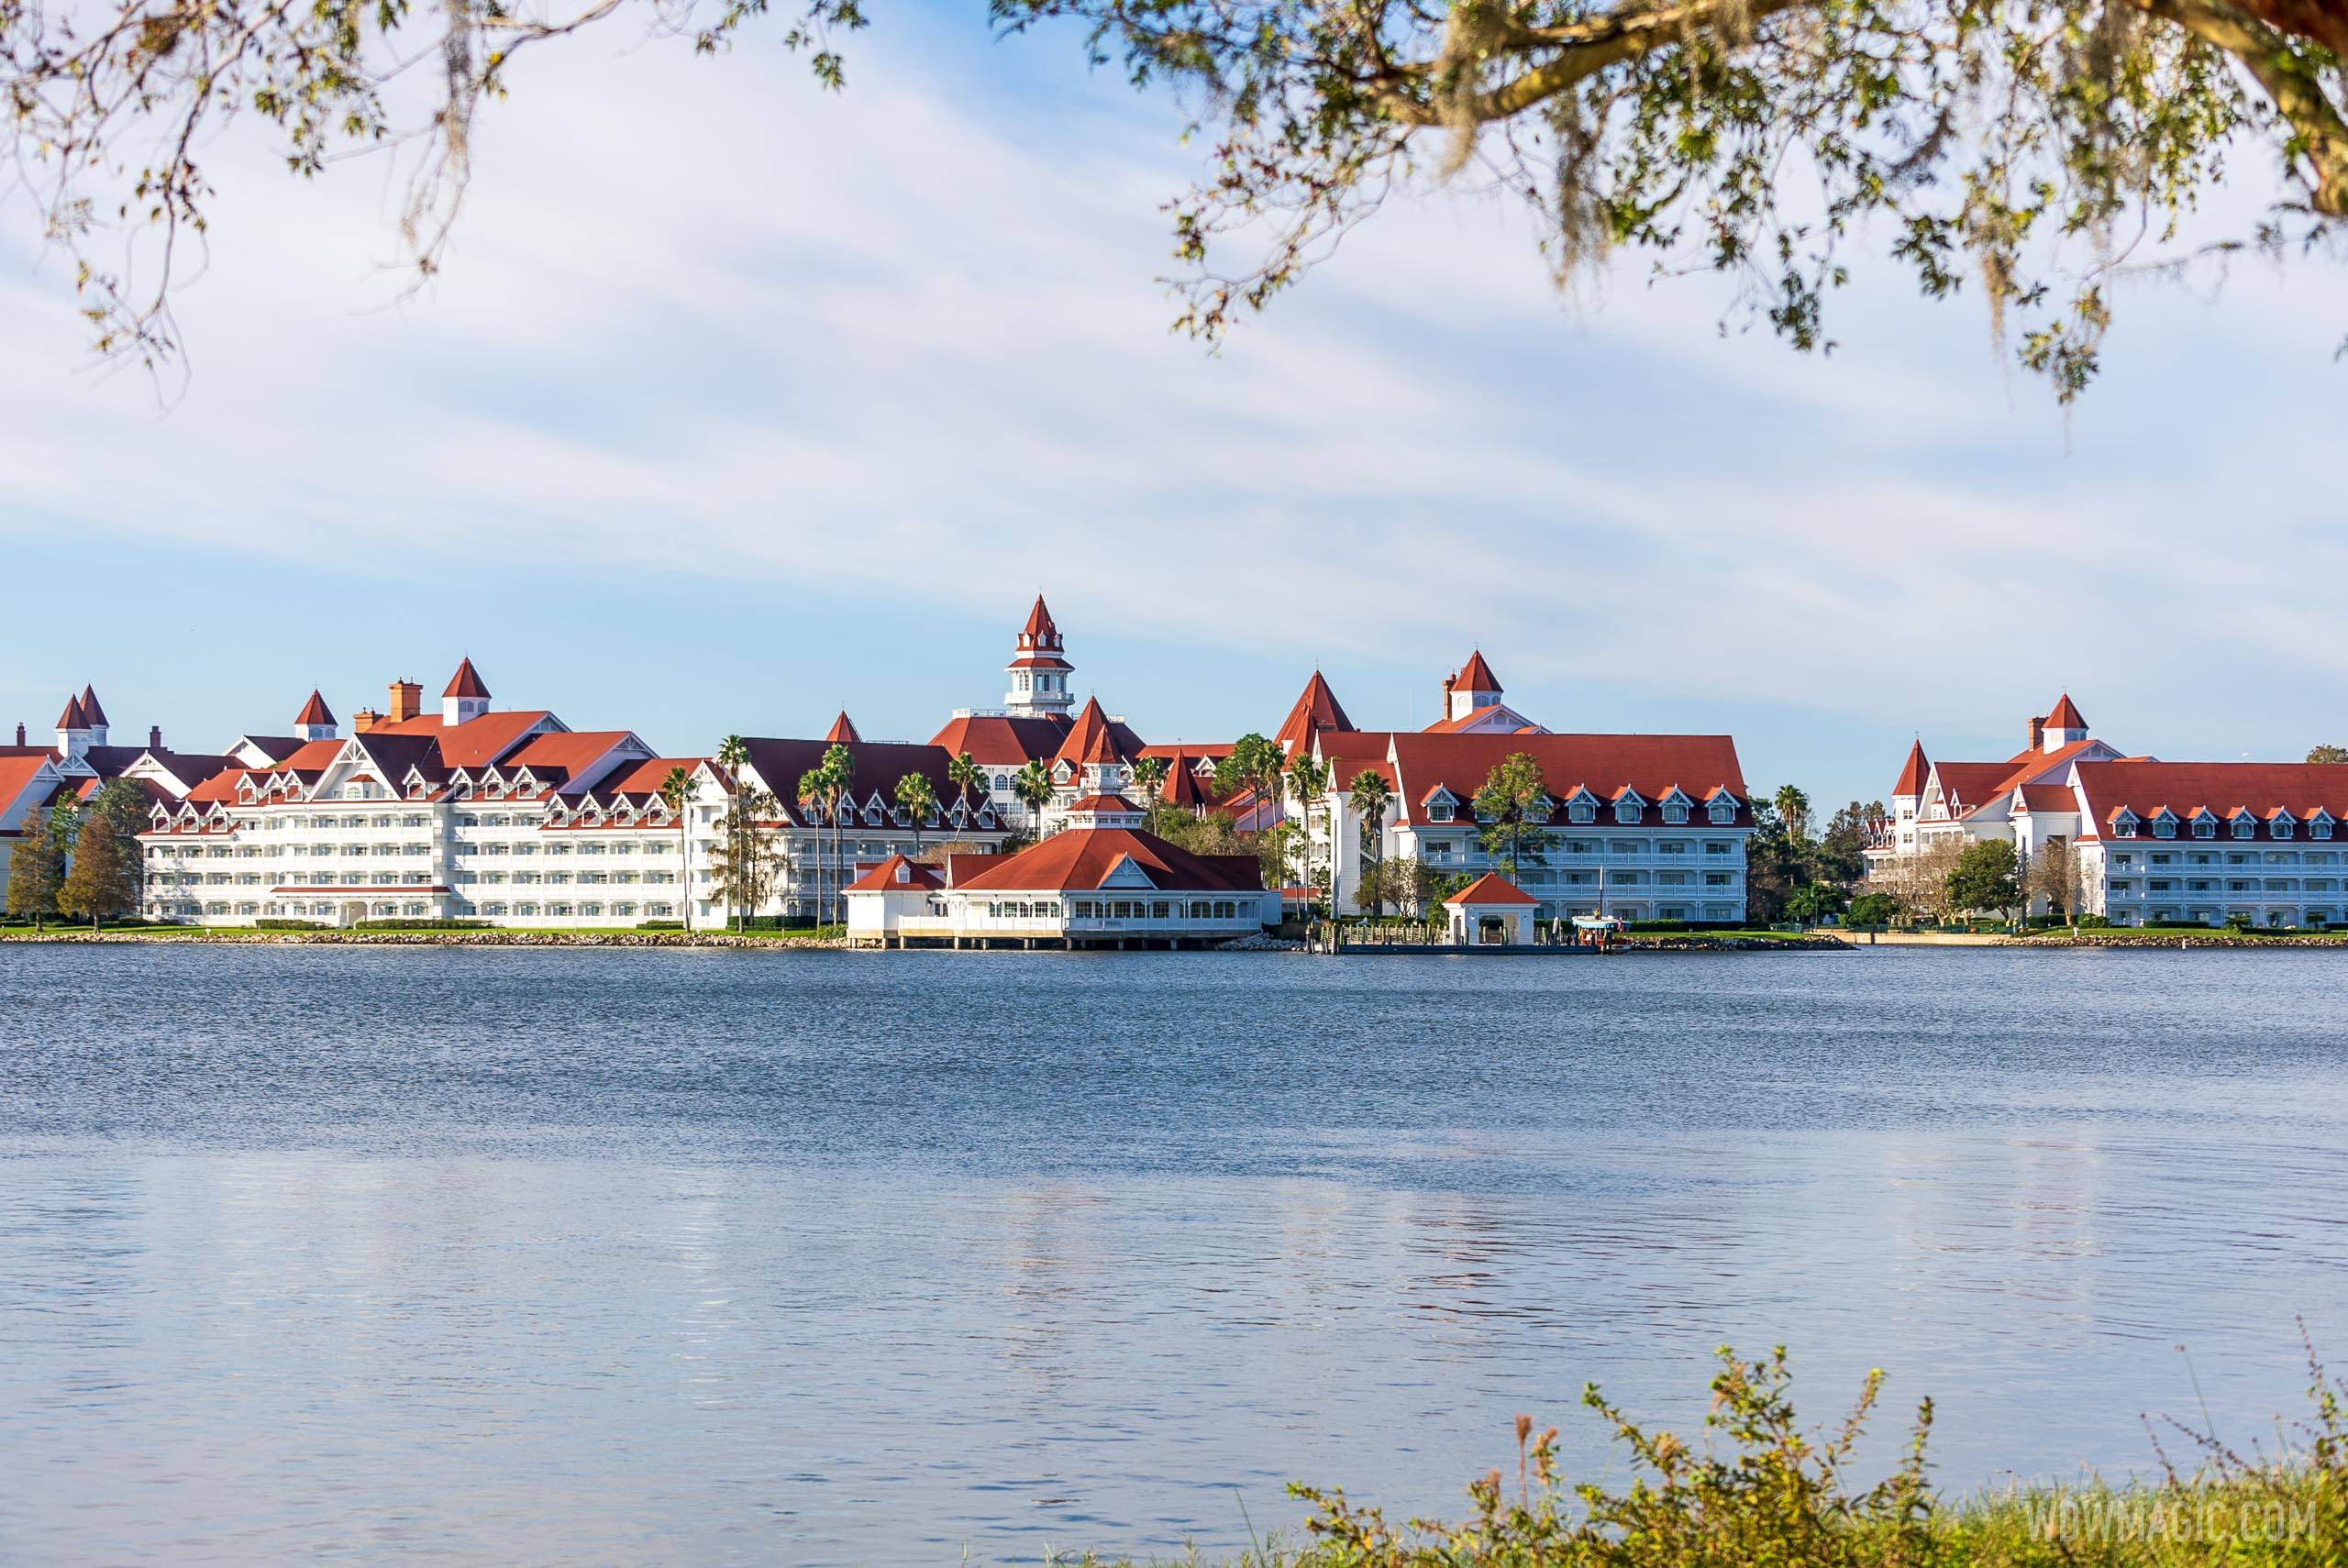 Parking at Disney's Grand Floridian Resort currently costs $25 per night but will now be free to guests